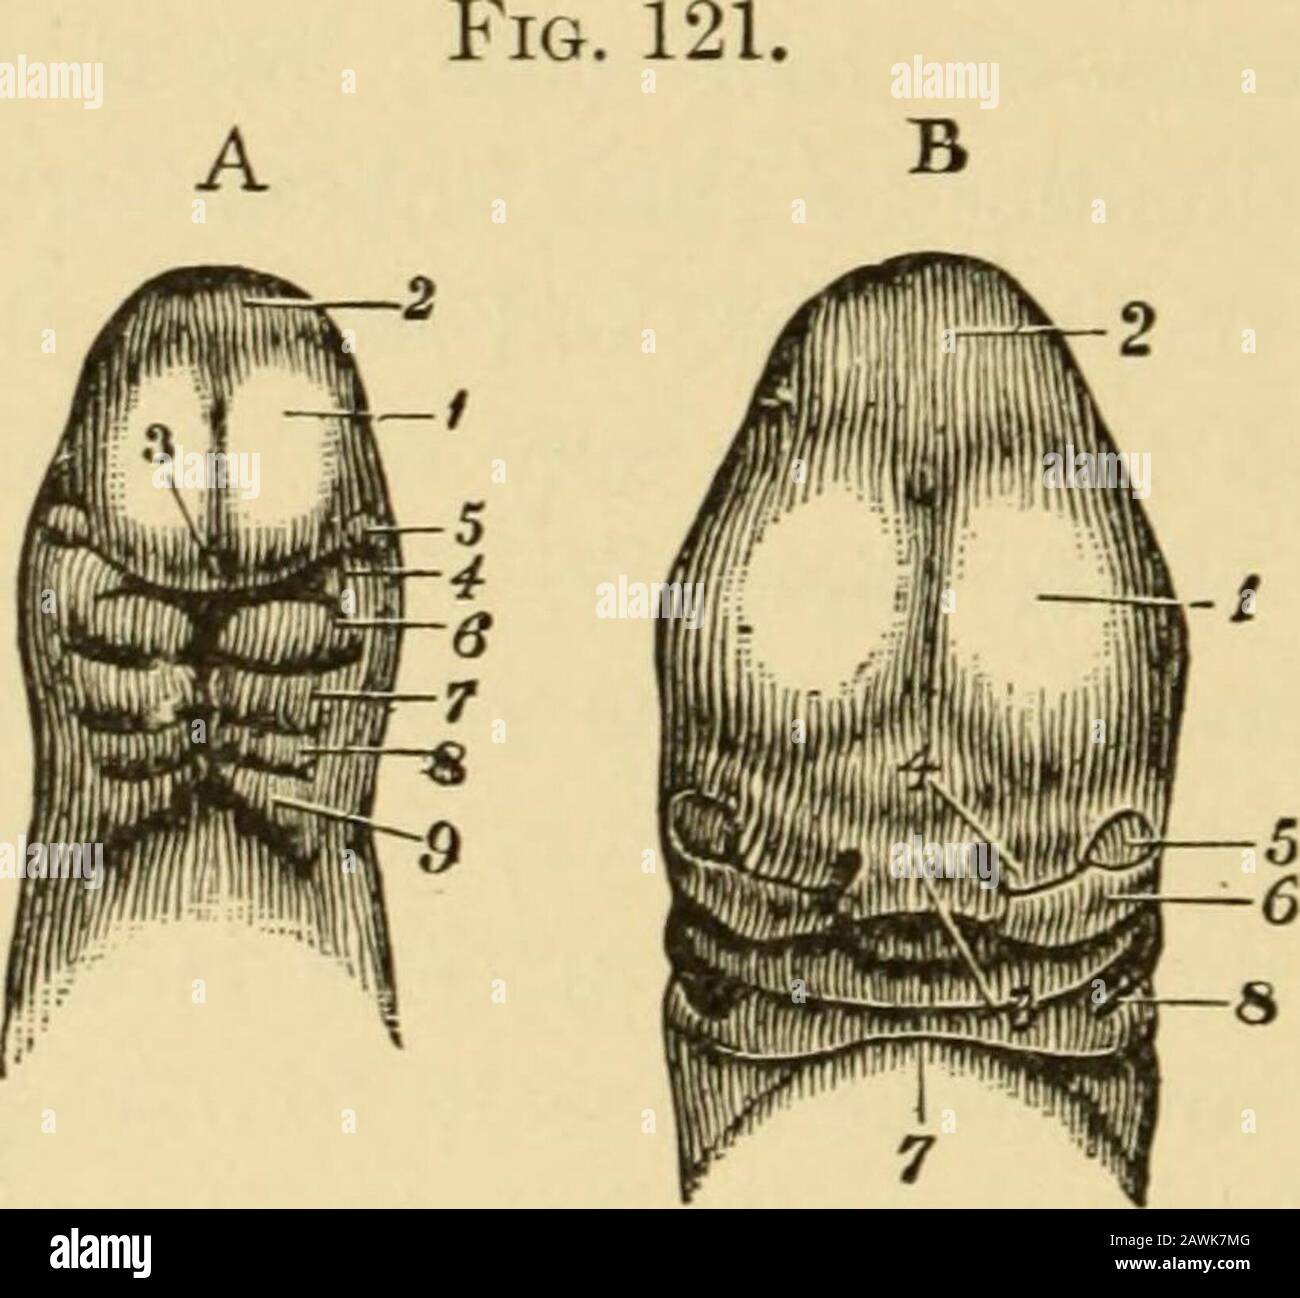 A system of obstetrics . on of the valve as to allow of the continued passageof venous blood, especially when the circulation is disturbed by over-exertion, from the right to the left auricle, as occurs in the malforma-tion [causing] the morbus coeruleus. The Visceral Arches and Clefts.—Closely connected in developmentalhistory with the aortic arches are certain structures known as the vis-ceral, or branchial, arches and clefts. These are primarily four pairs ofslits on the sides of the neck, which in fishes and many amphibia remainthroughout life as the gill-clefts extending from the exterior Stock Photo